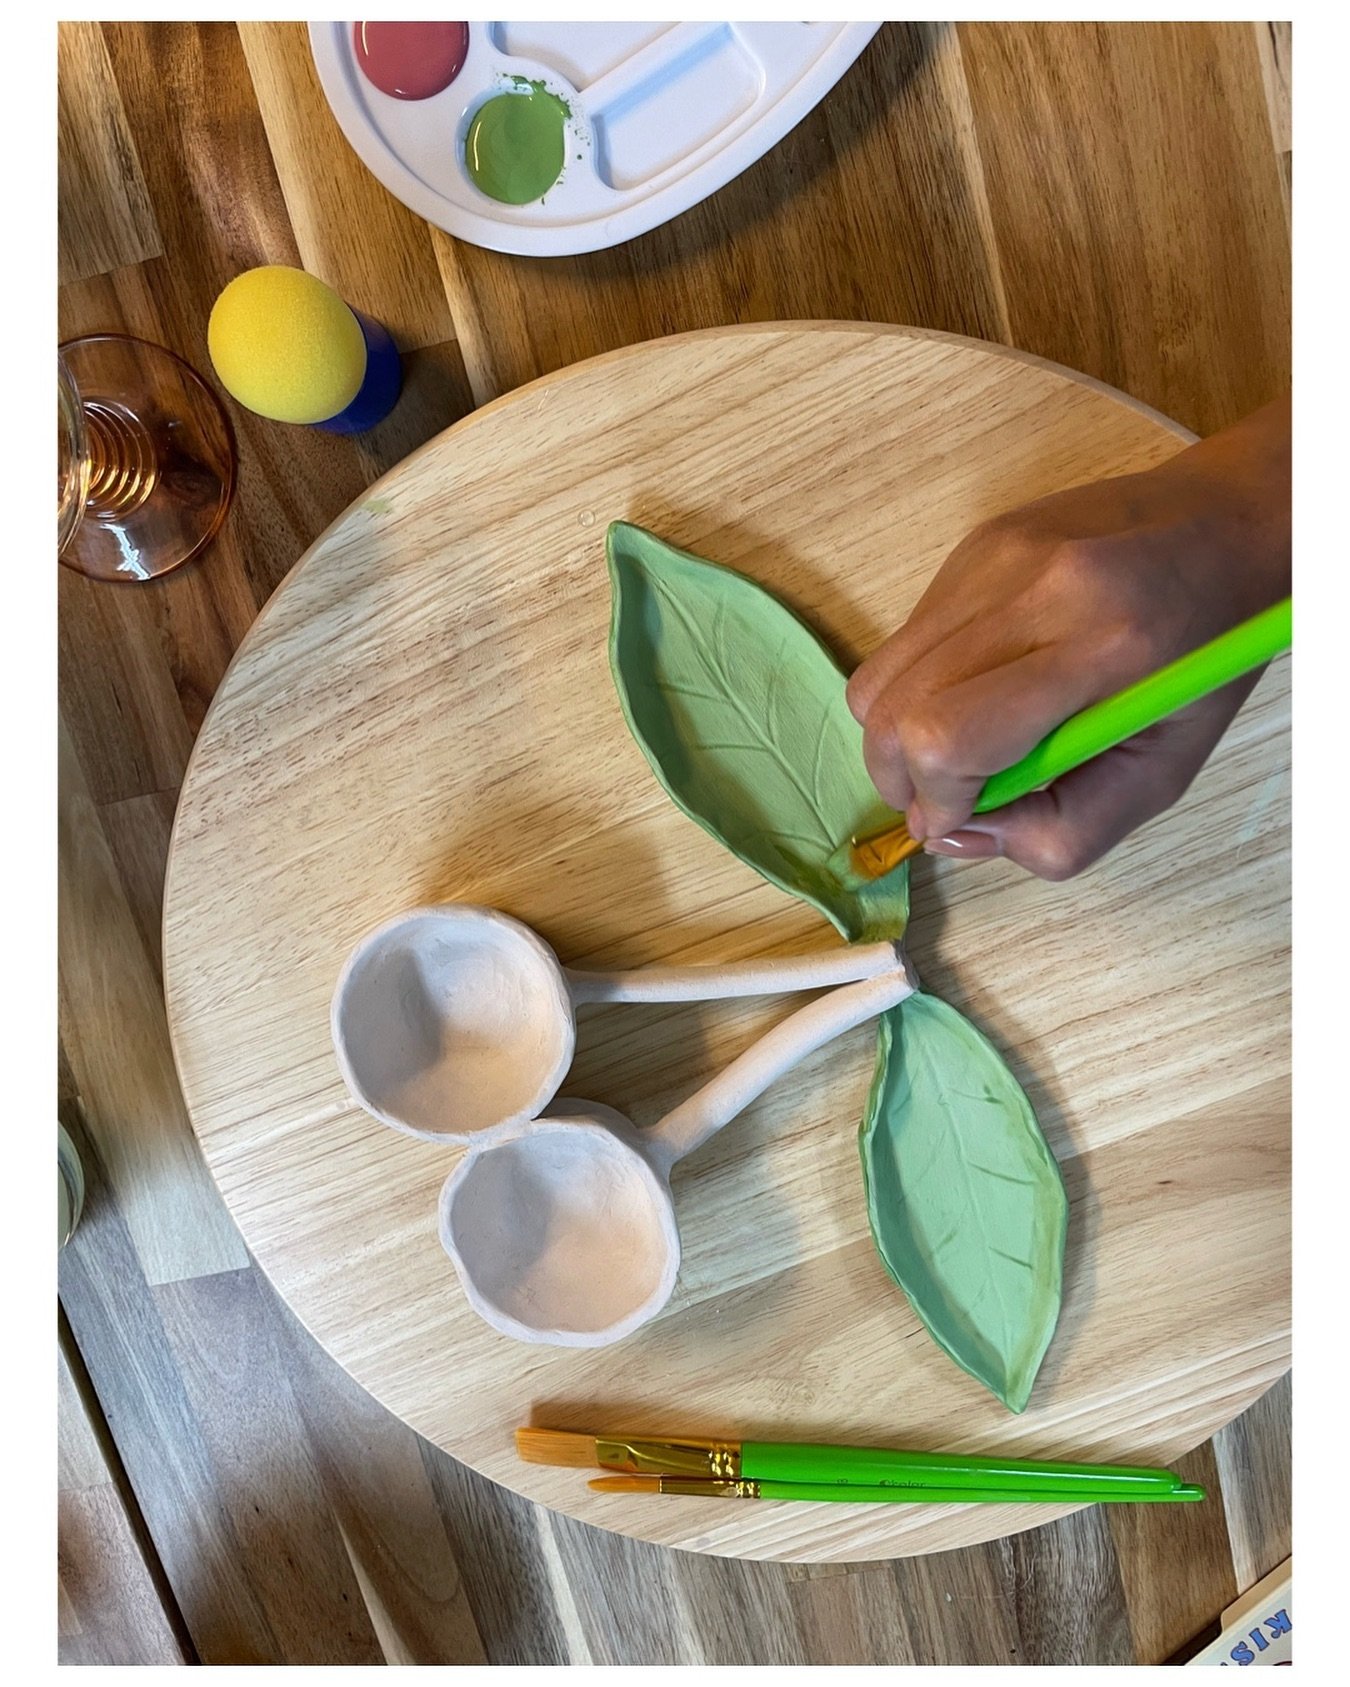 Spring is inspiring us all ! 🍒 the cutest pottery painting session ! 

#potterystudio #potterypainting #keramikbemalen #hellozurich #potteryzurich #expatzurich